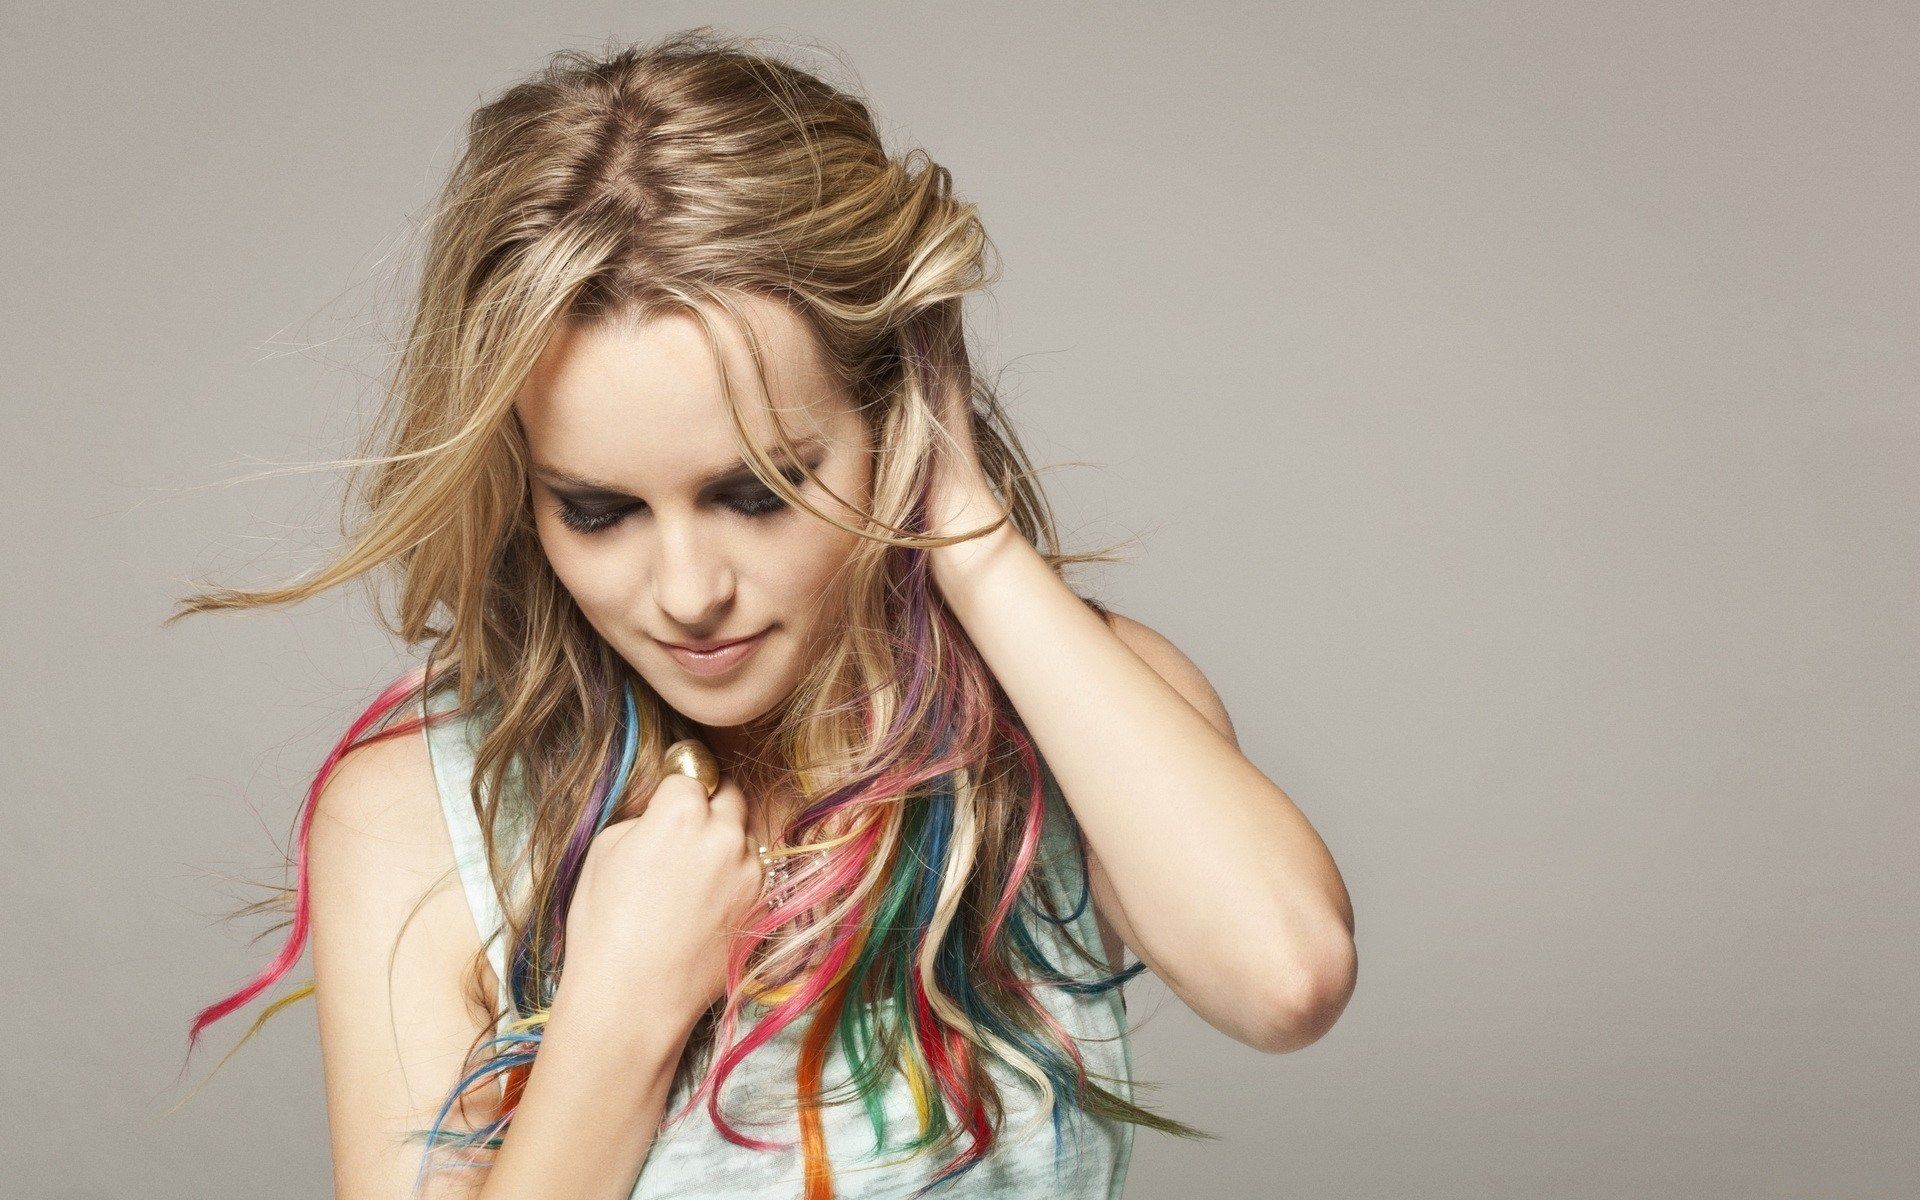 Naughty And Colorful Bridgit Mendler HD. HD Hollywood Actresses Wallpaper for Mobile and Desktop